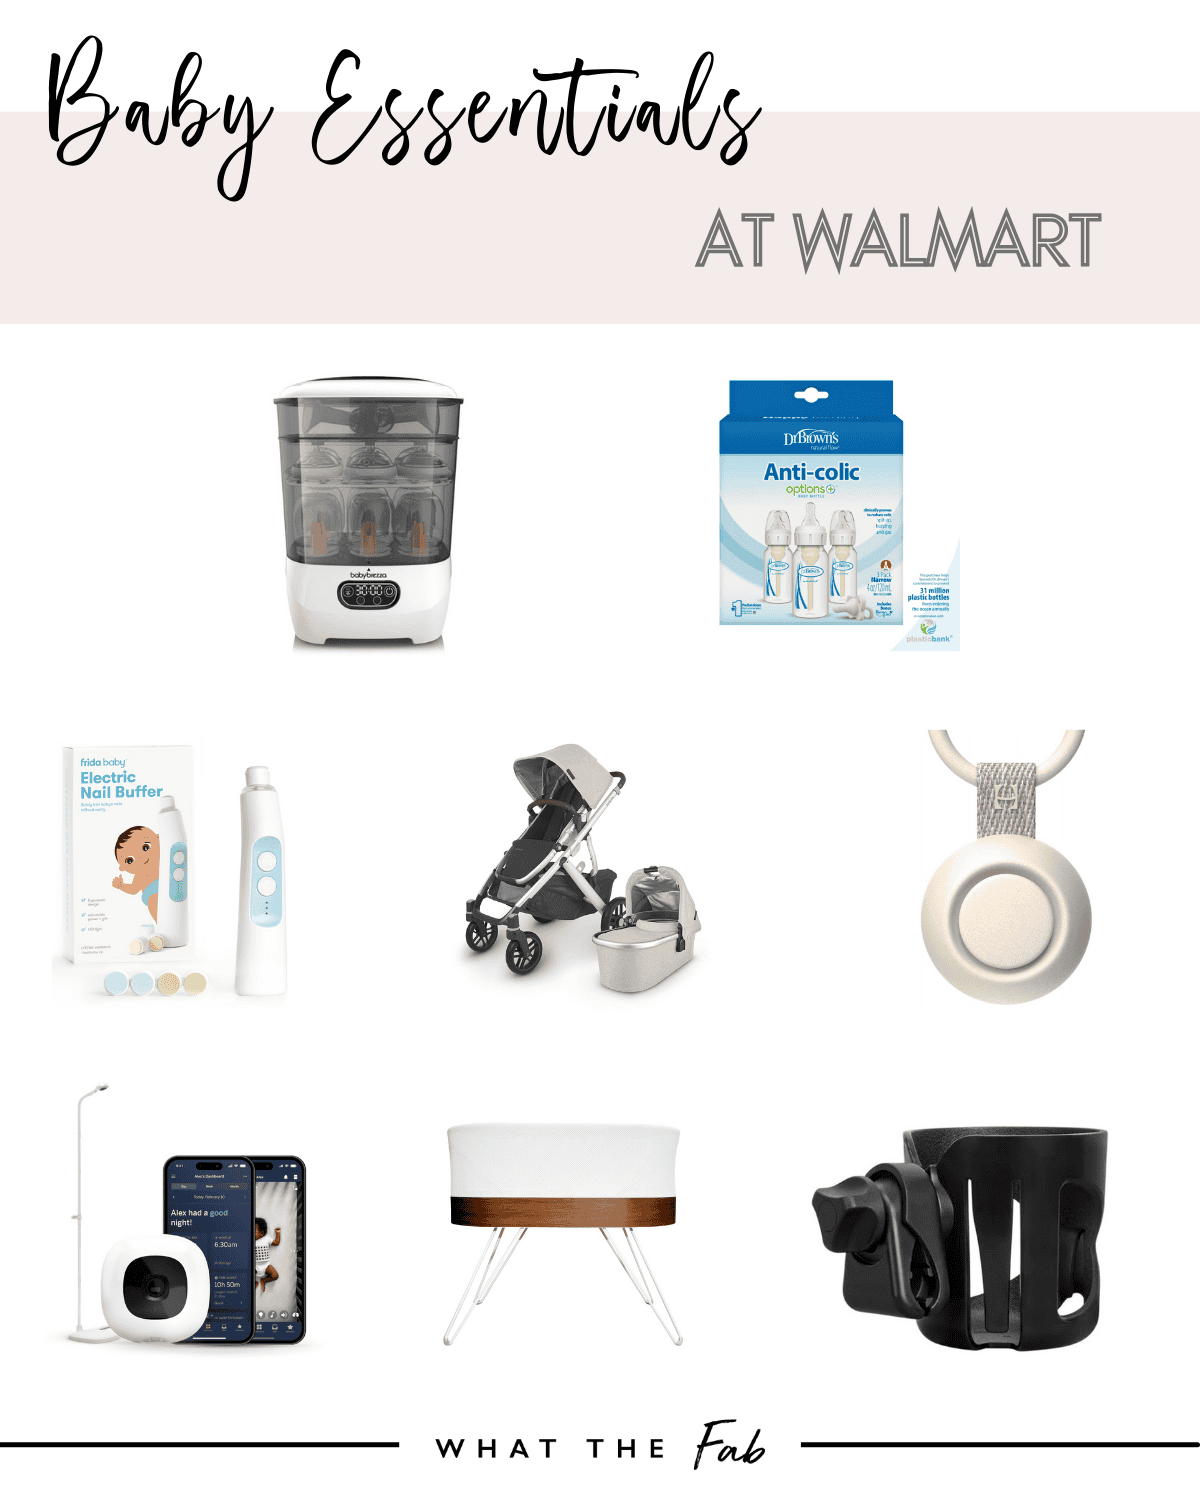 Top 8 Baby Items from Our Registry